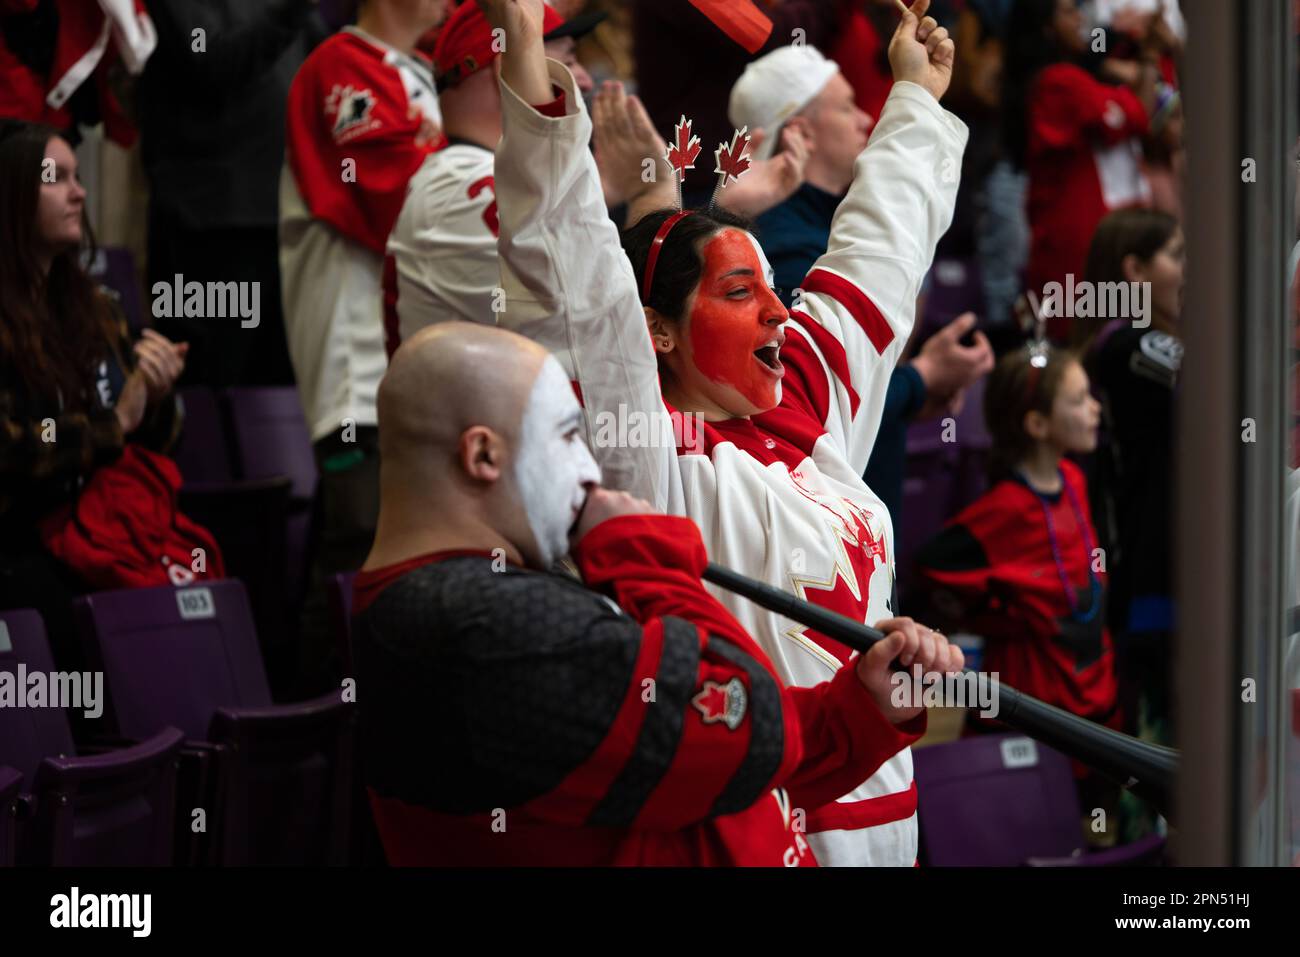 Canadian fans celebrating the win at the Women's World Hockey championship game in Brampton, Ontario Canada. Happy woman cheering in the bleachers. Stock Photo